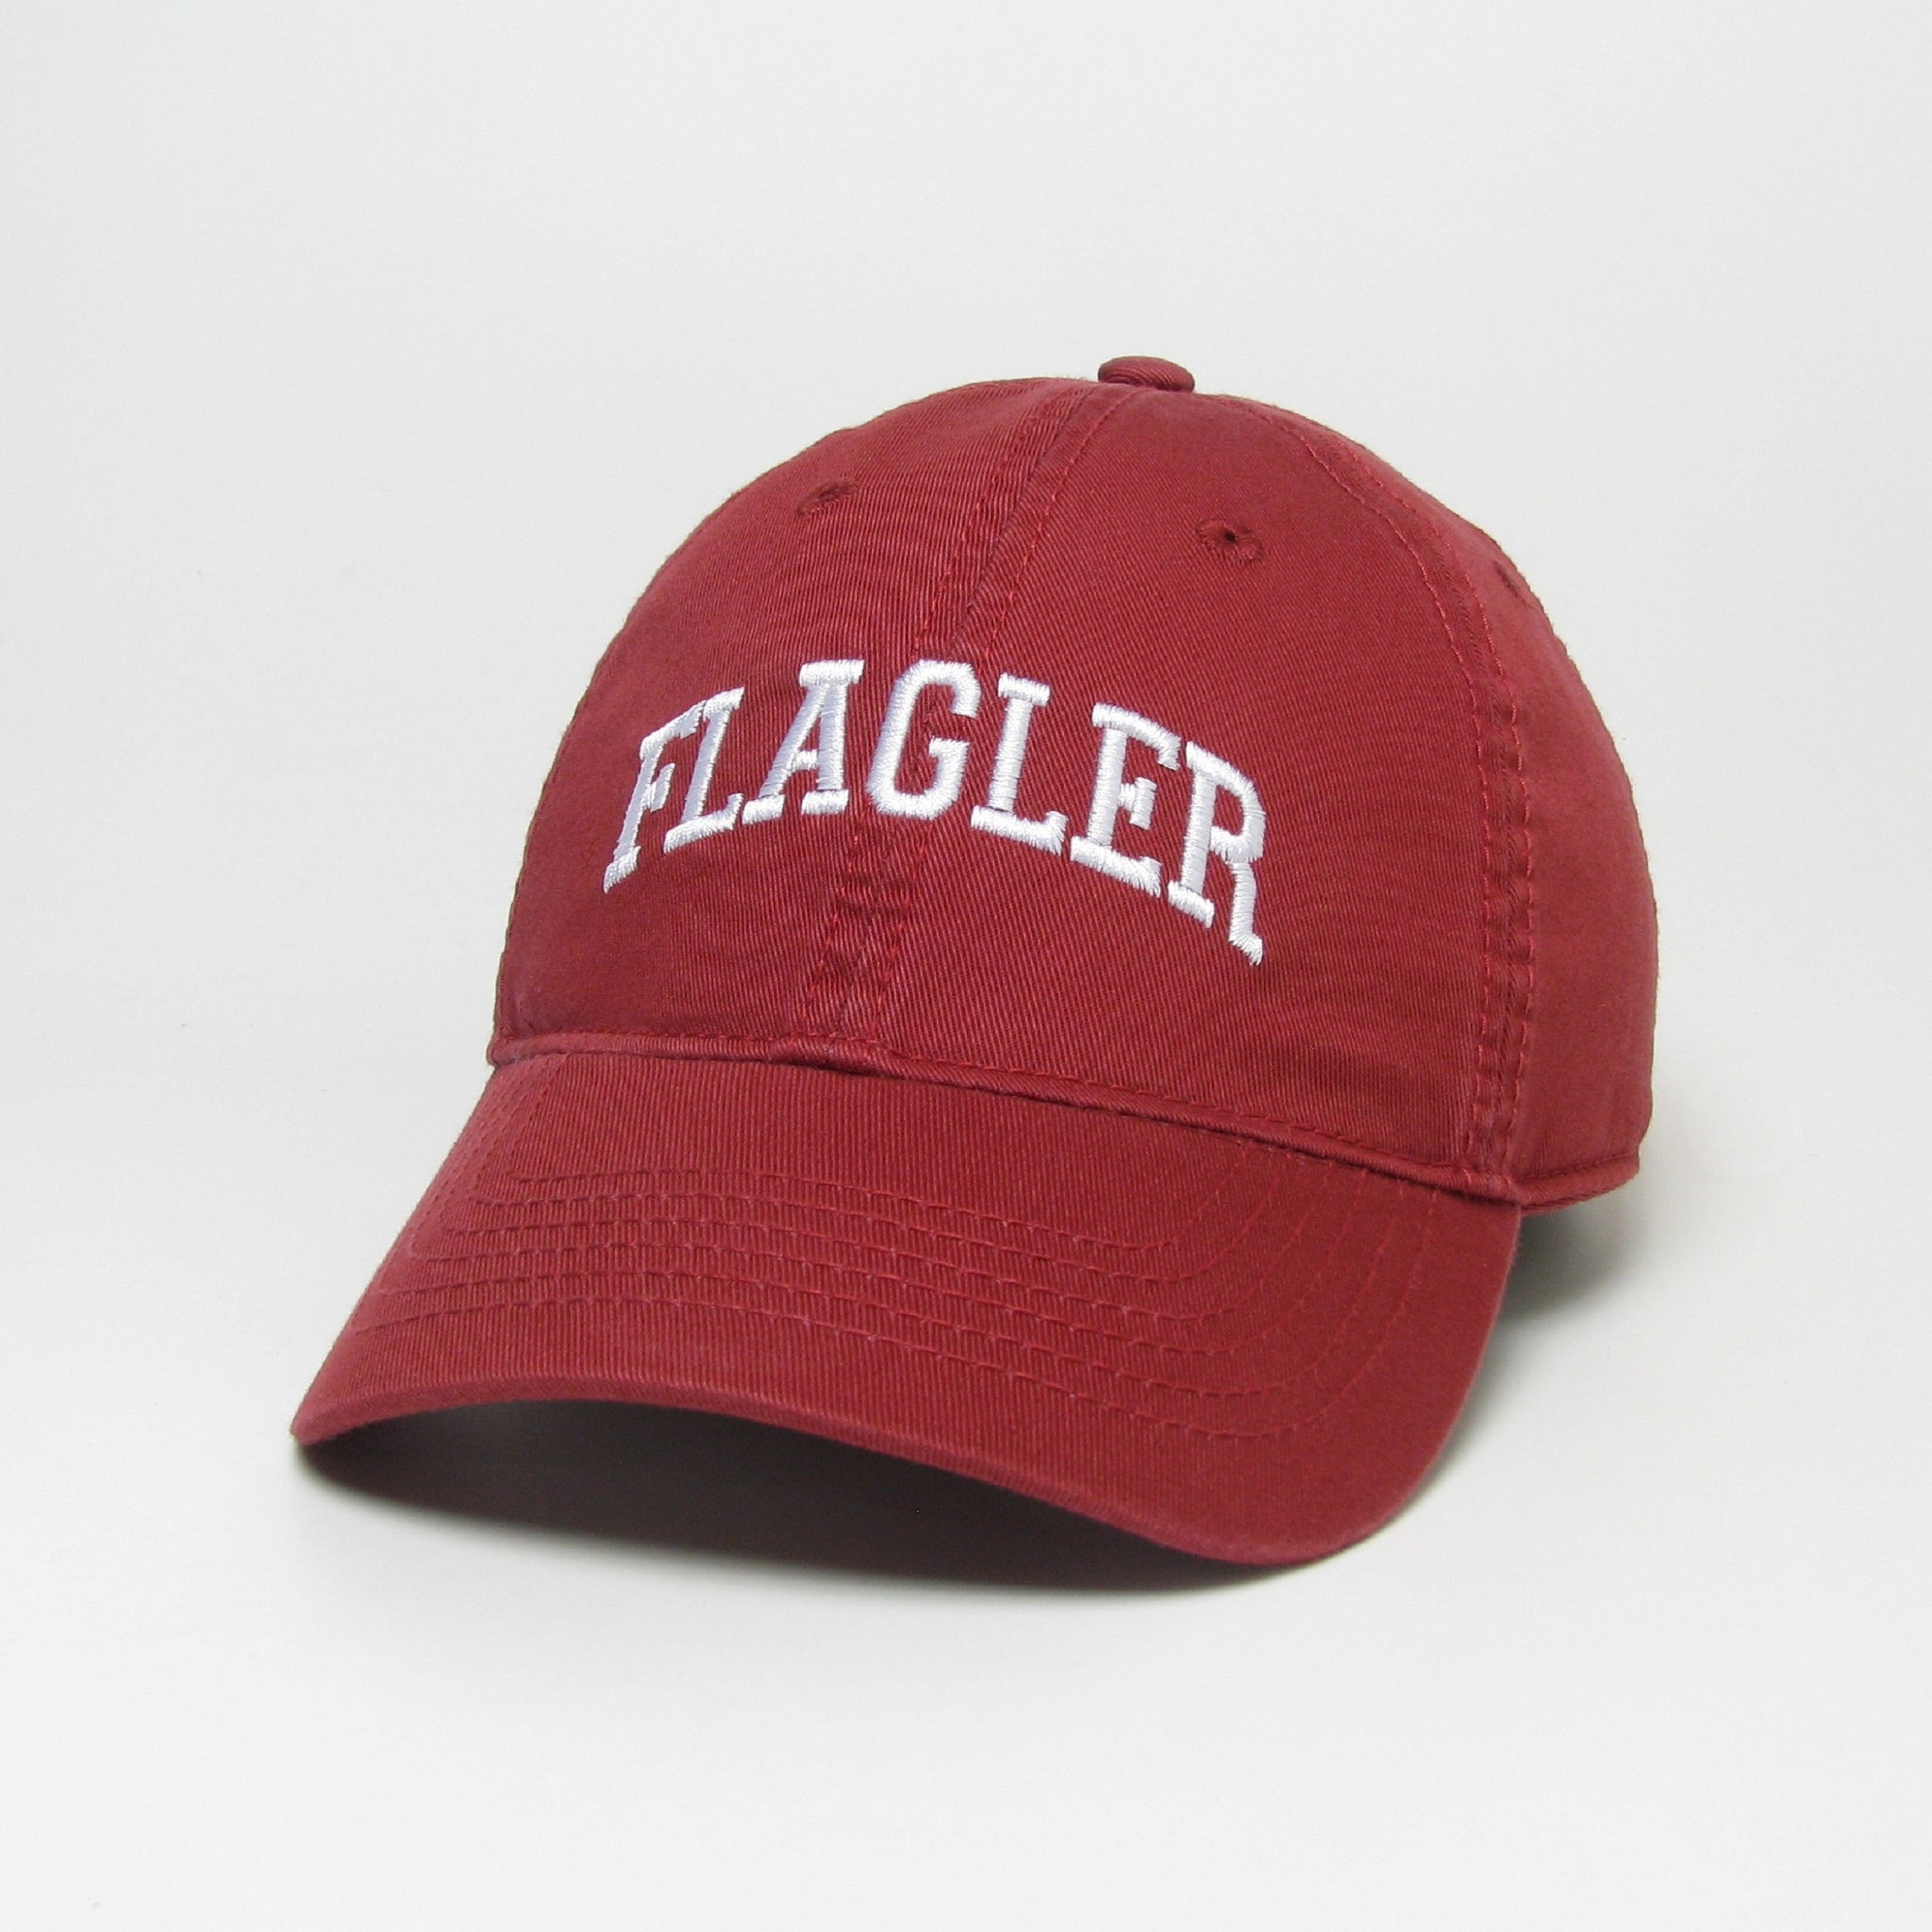 red hat with white embroider saying Flagler